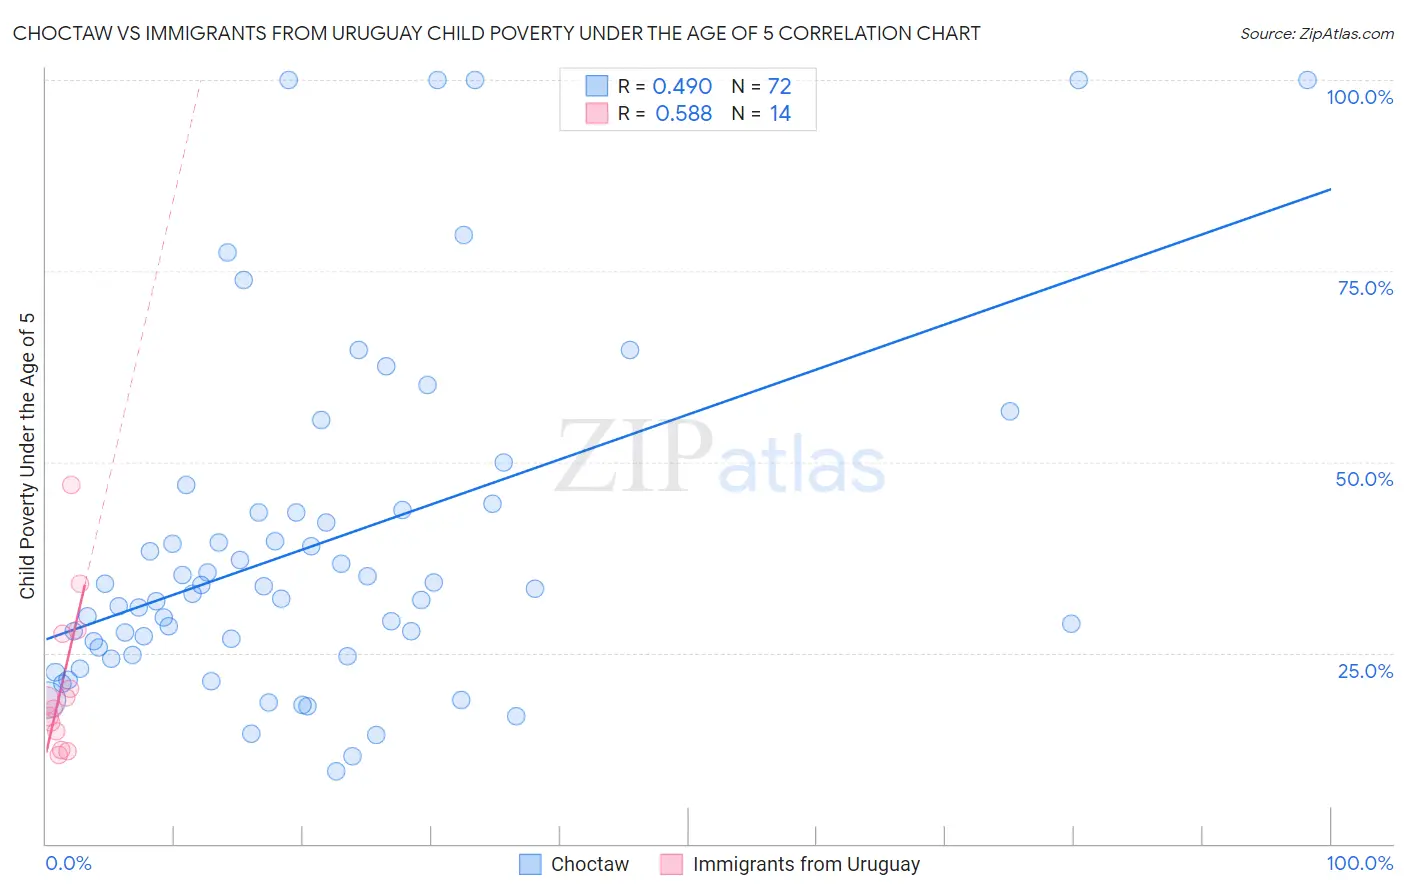 Choctaw vs Immigrants from Uruguay Child Poverty Under the Age of 5